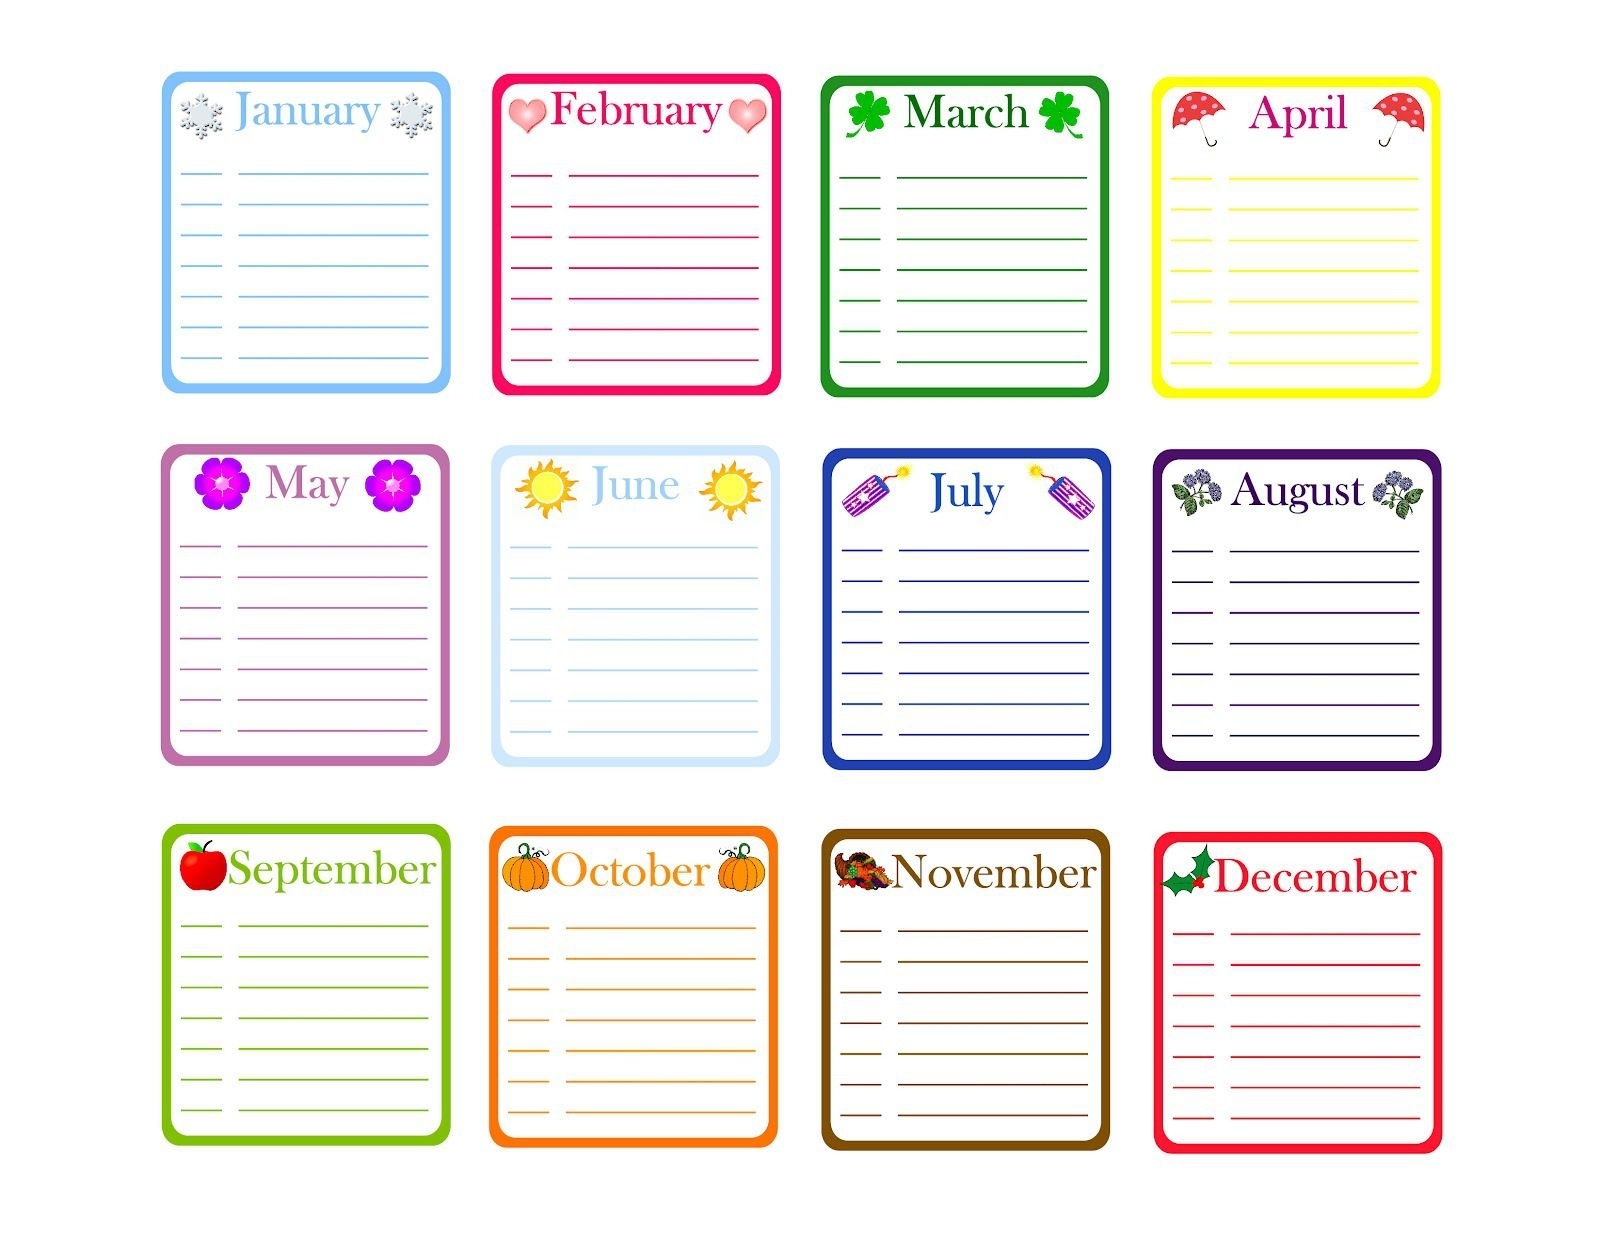 Yearly Birthday Calendar Template. Free Classroom Printables throughout Free 12 Month Birthday Calendar Template